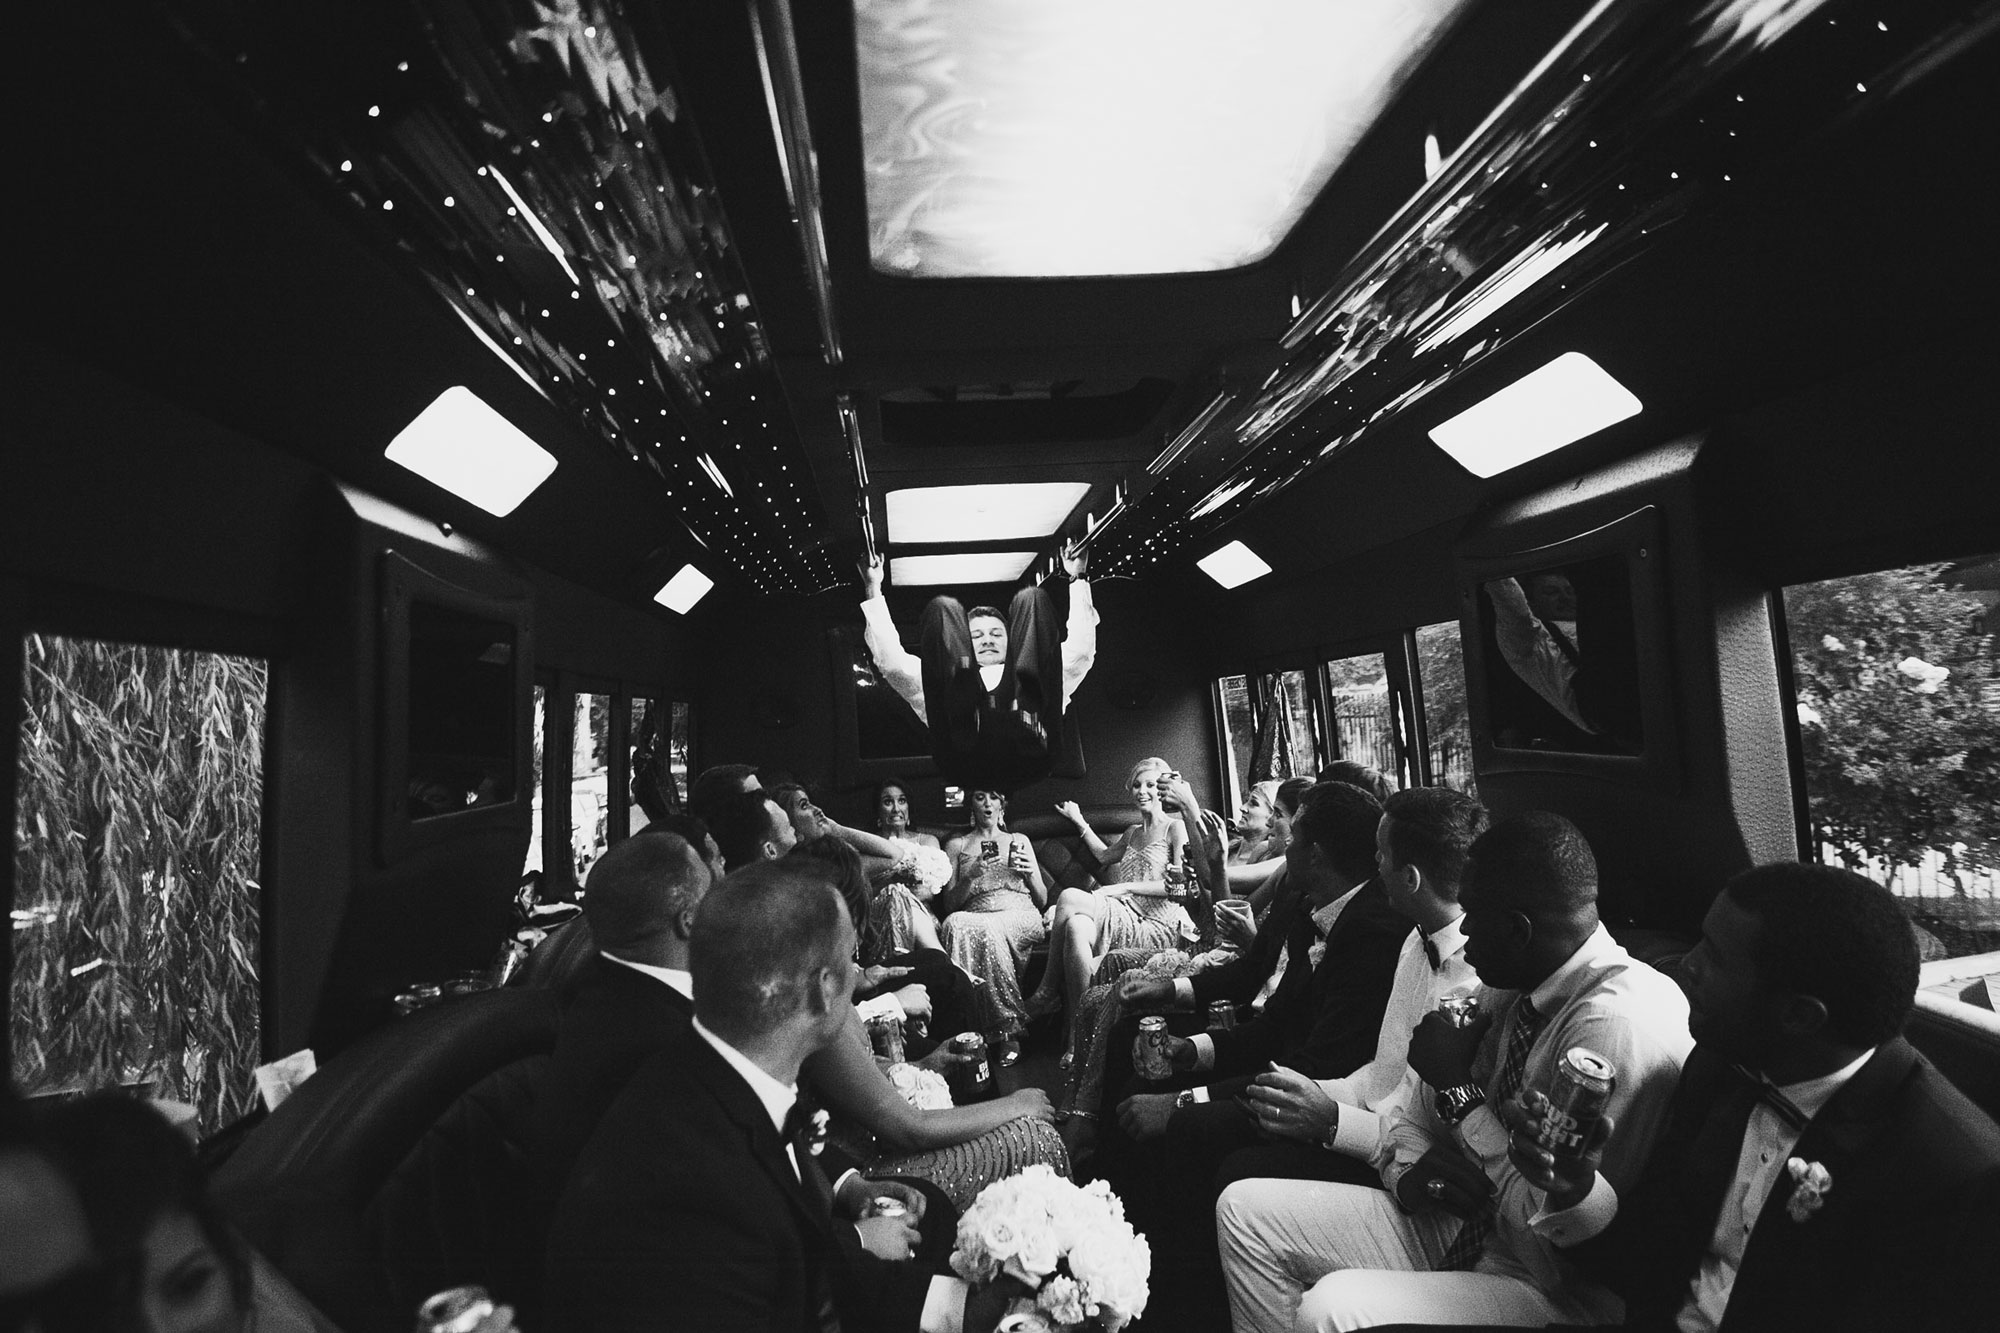 bridal party in a limo